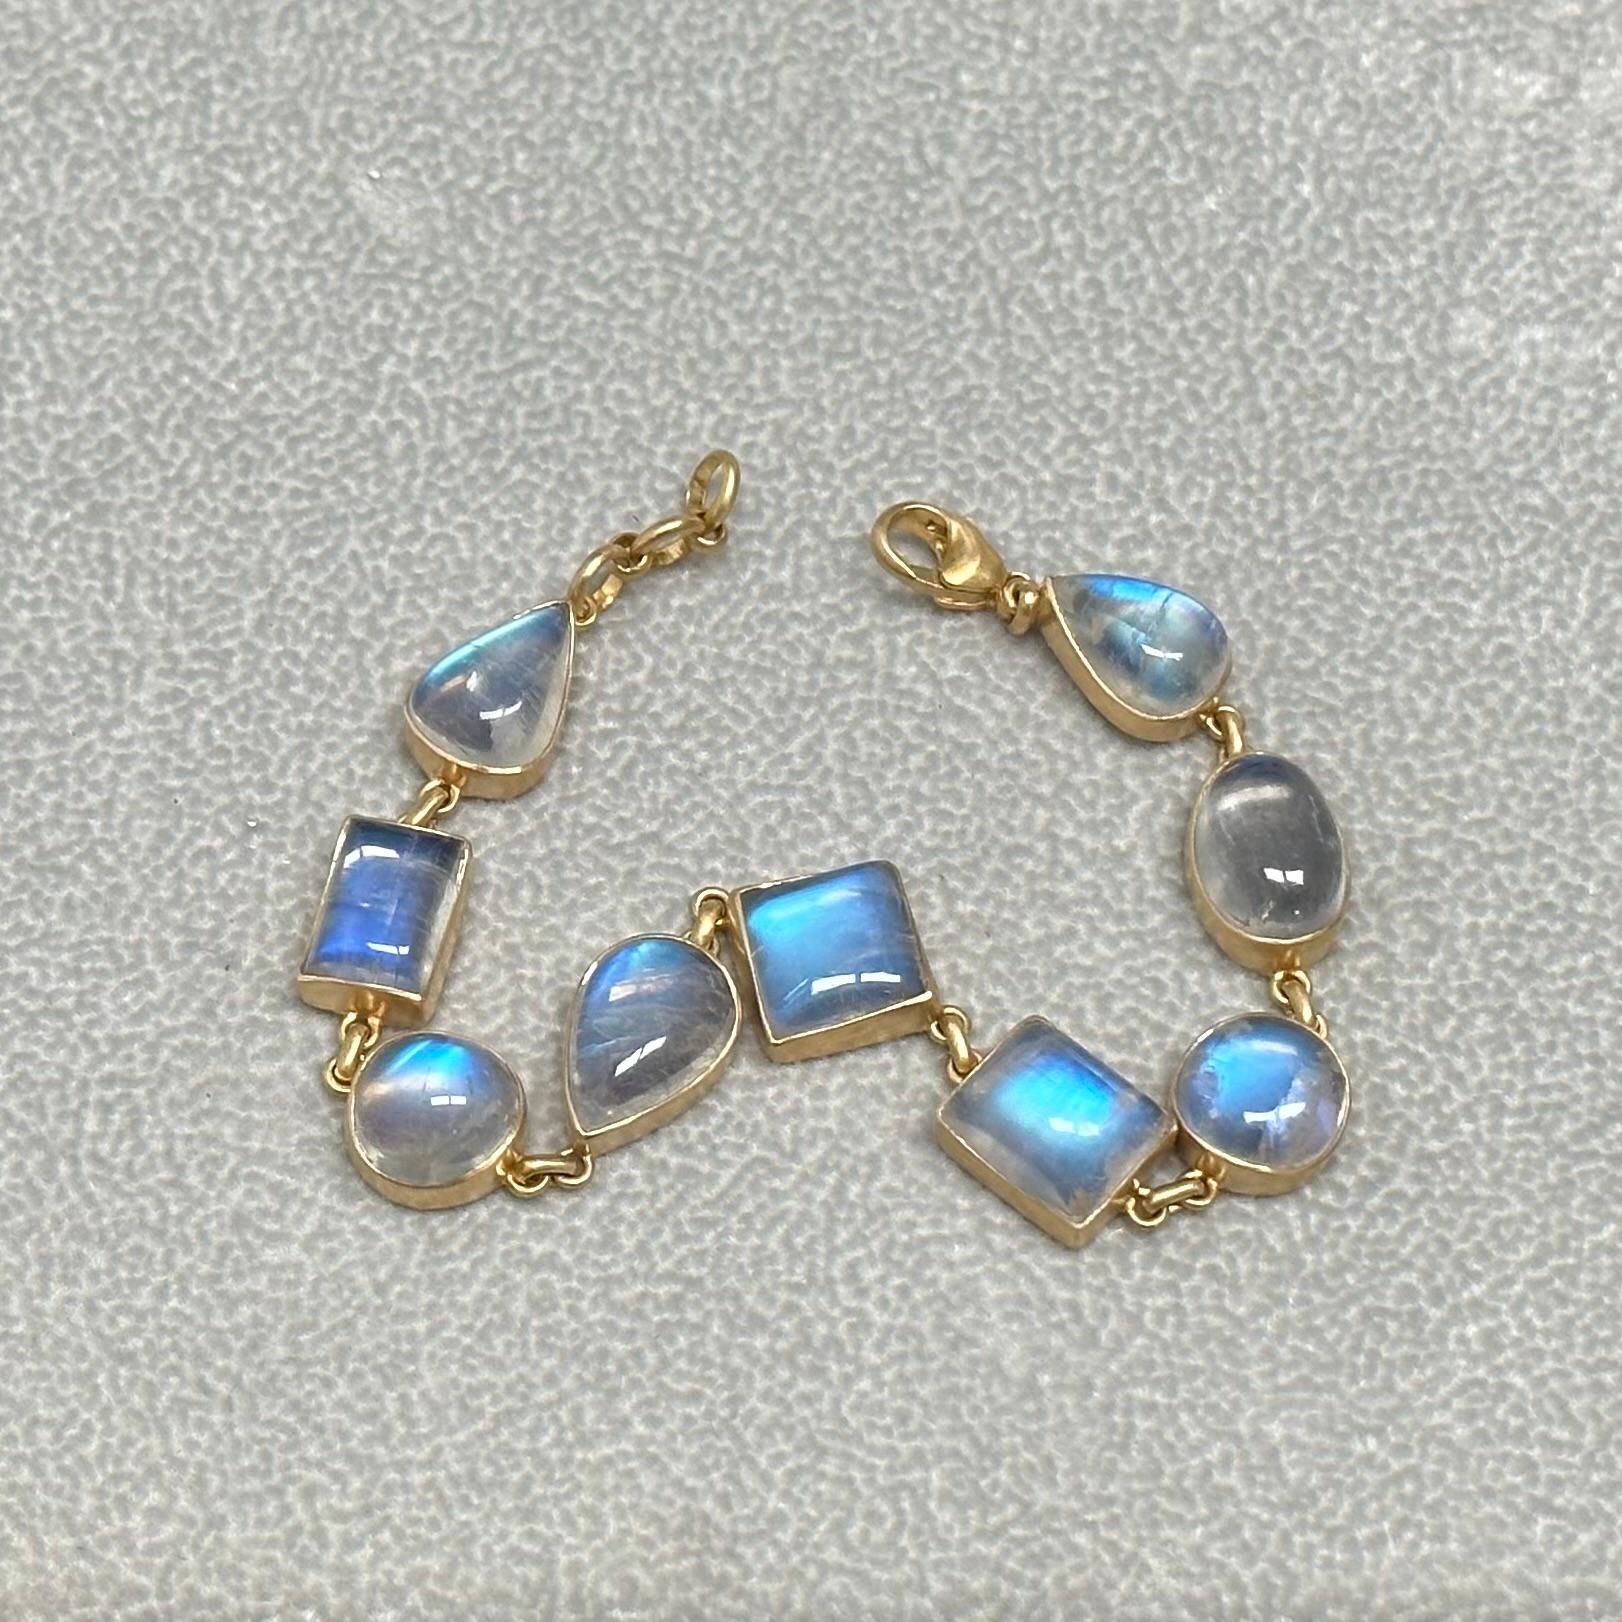 Steven Battelle 37.3 Carats Cabochon Rainbow Moonstone 18k Gold Bracelet In New Condition For Sale In Soquel, CA